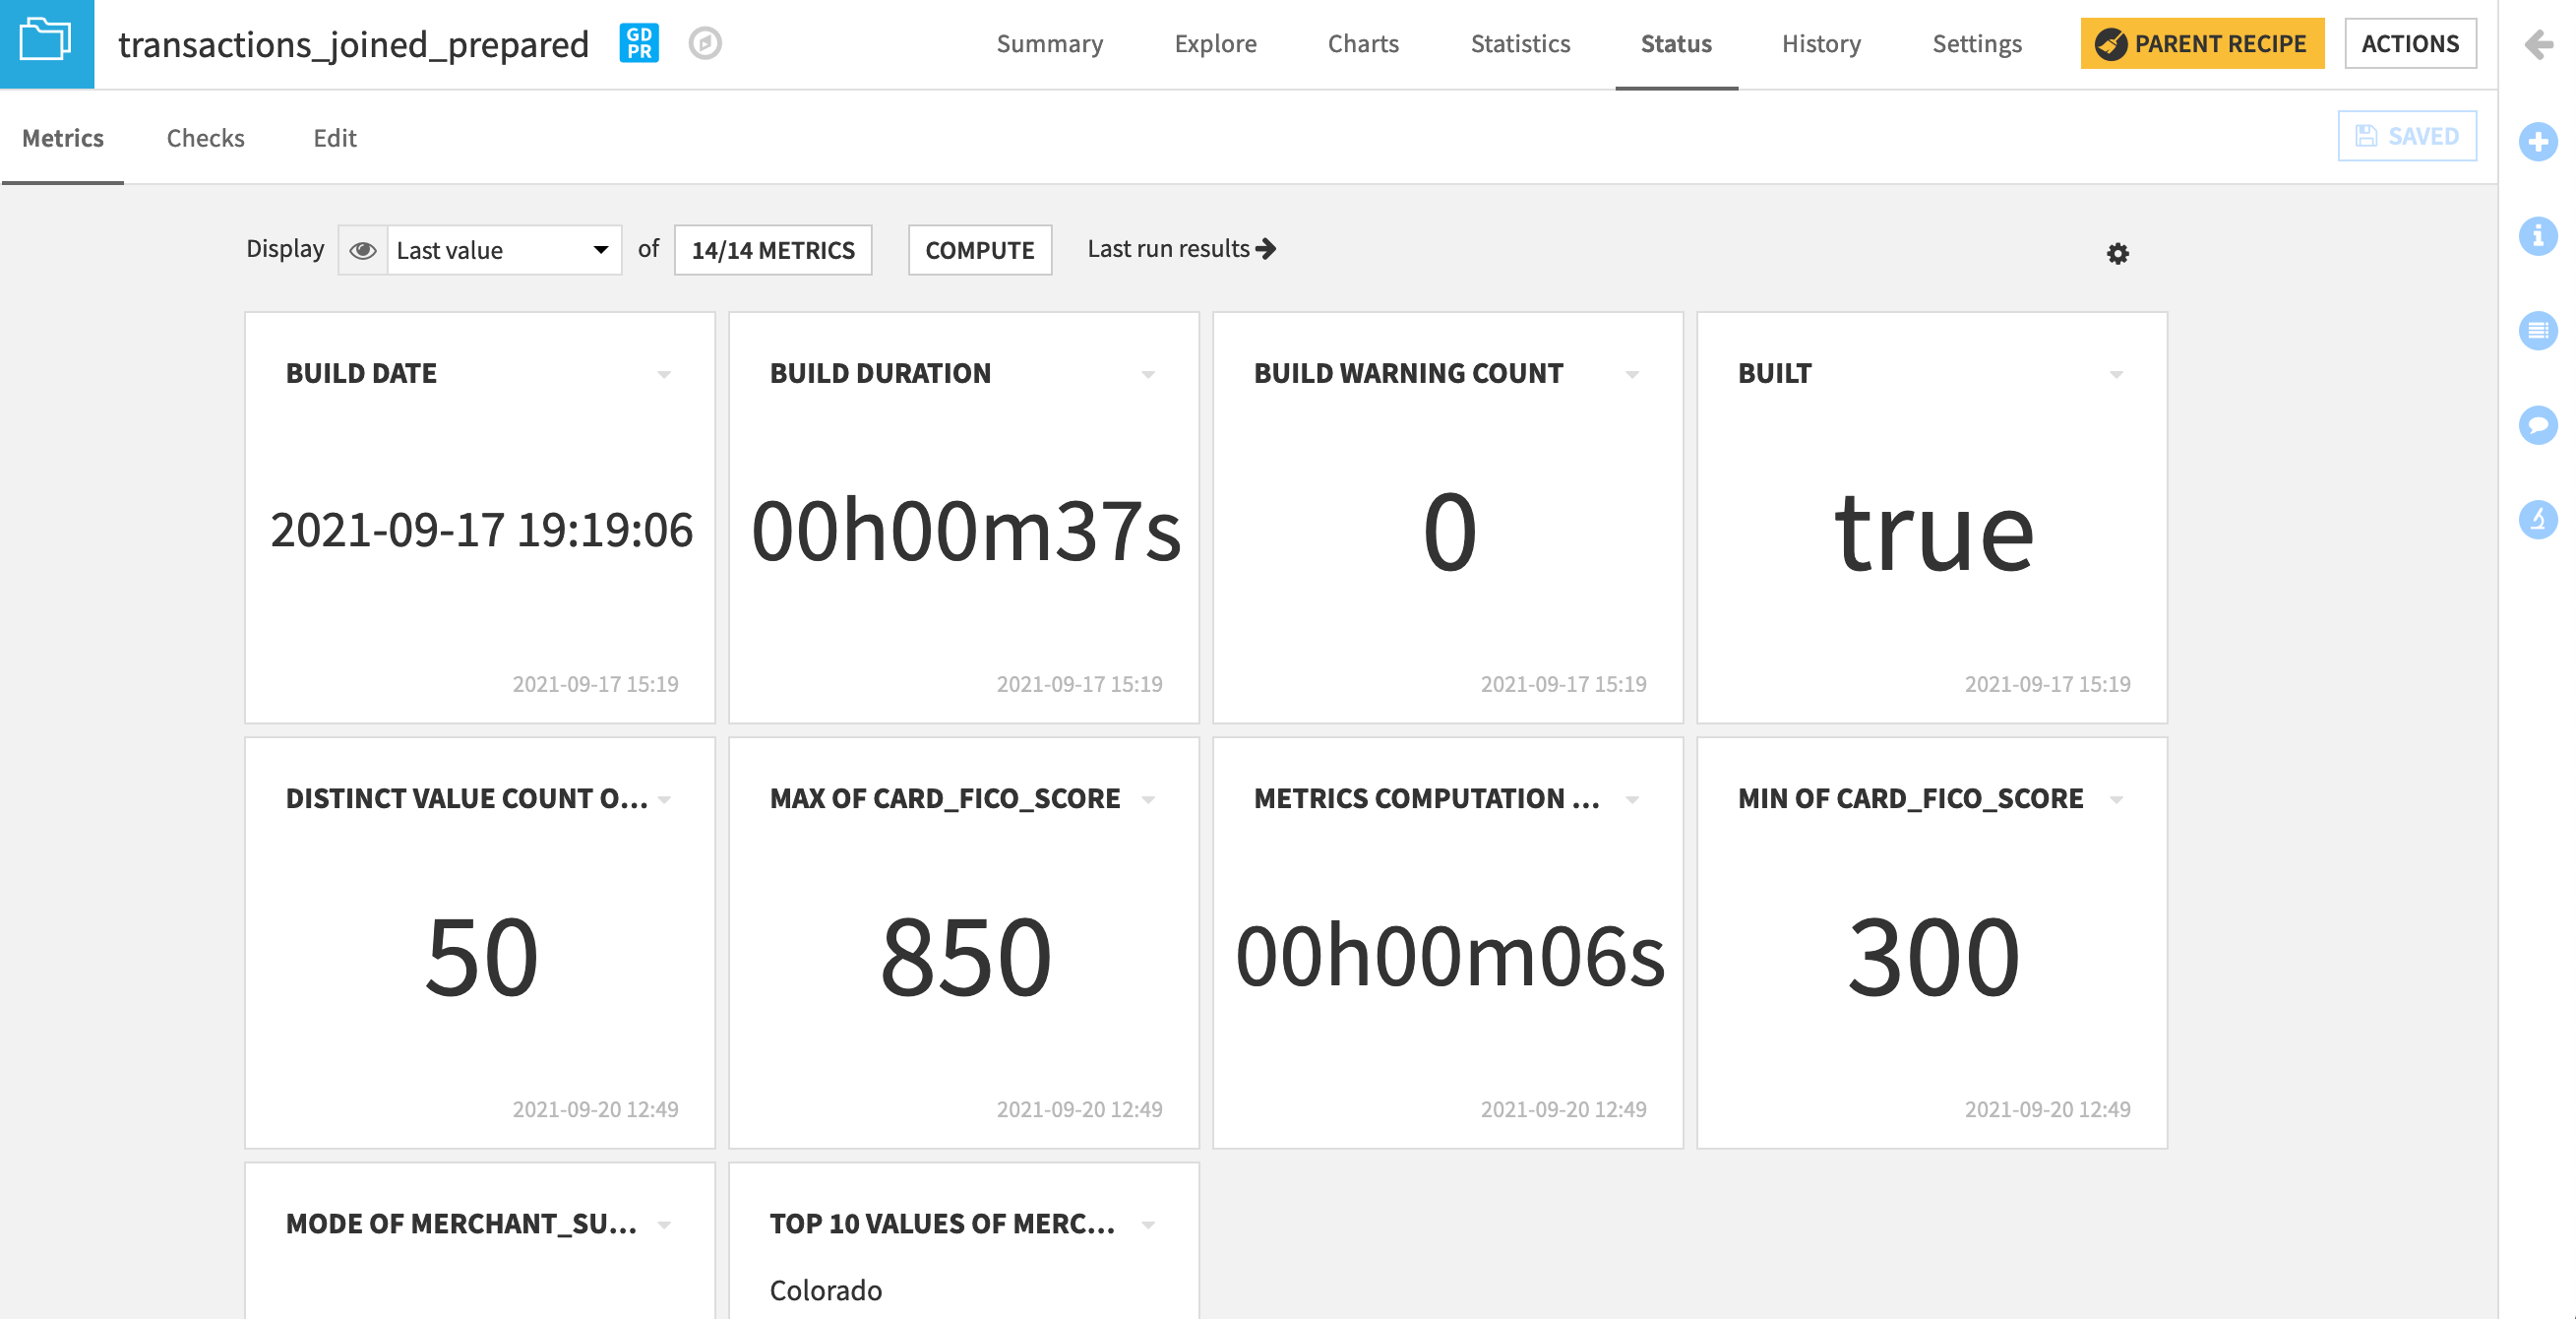 The Metrics subtab of the Status tab of the transactions_joined_prepared dataset showing new metrics.